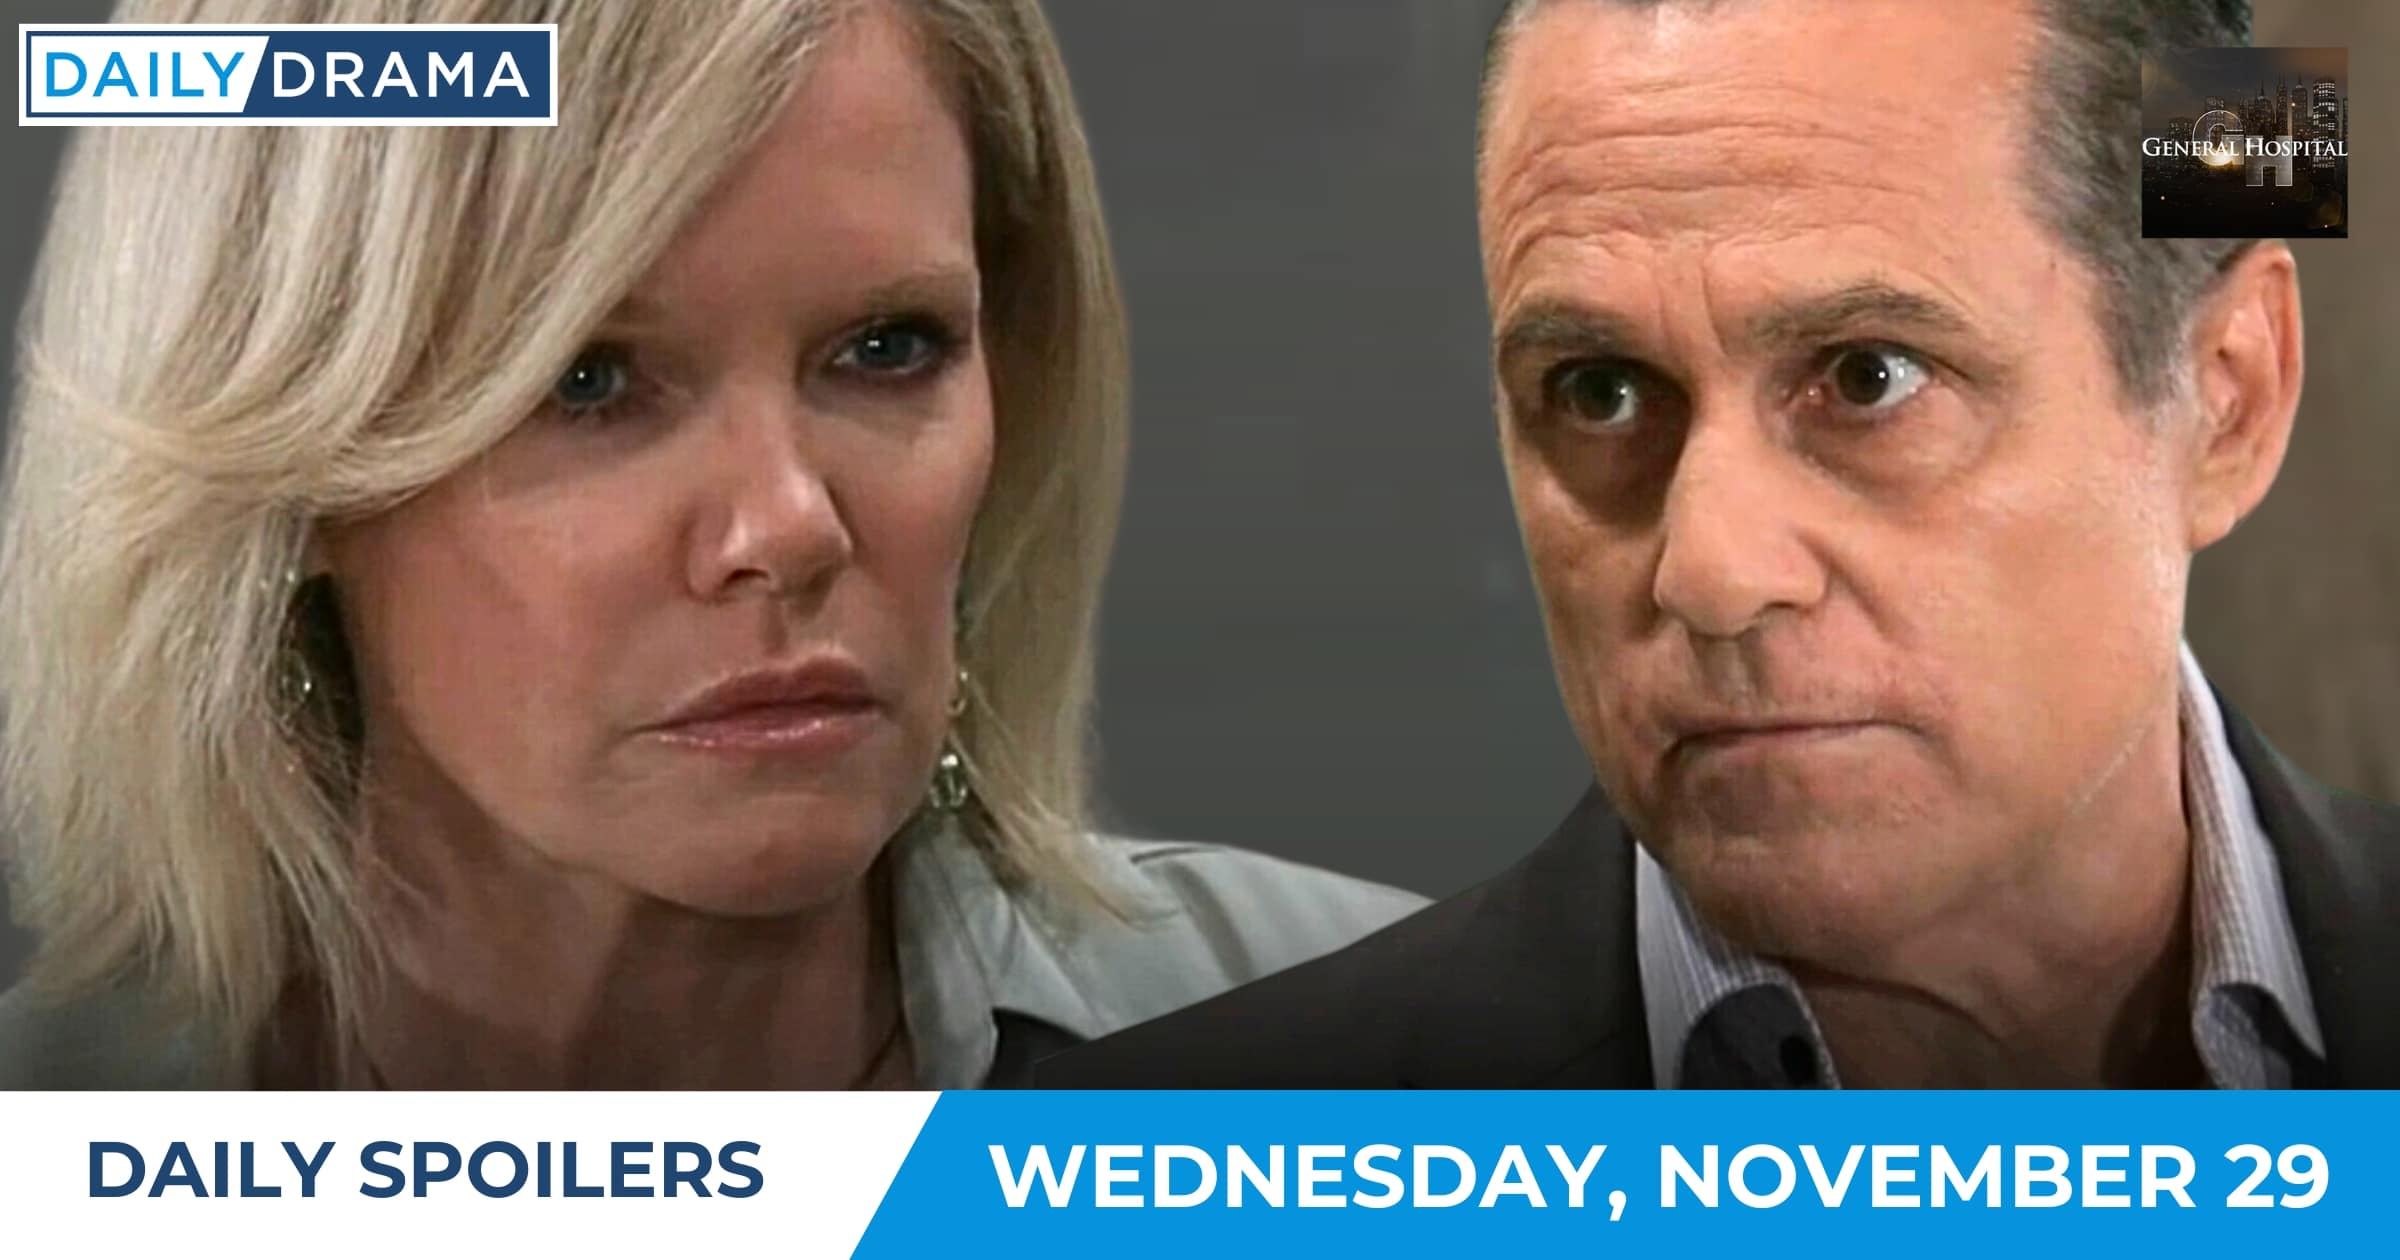 General Hospital Daily Spoilers - Nov 29 - Ava and Sonny